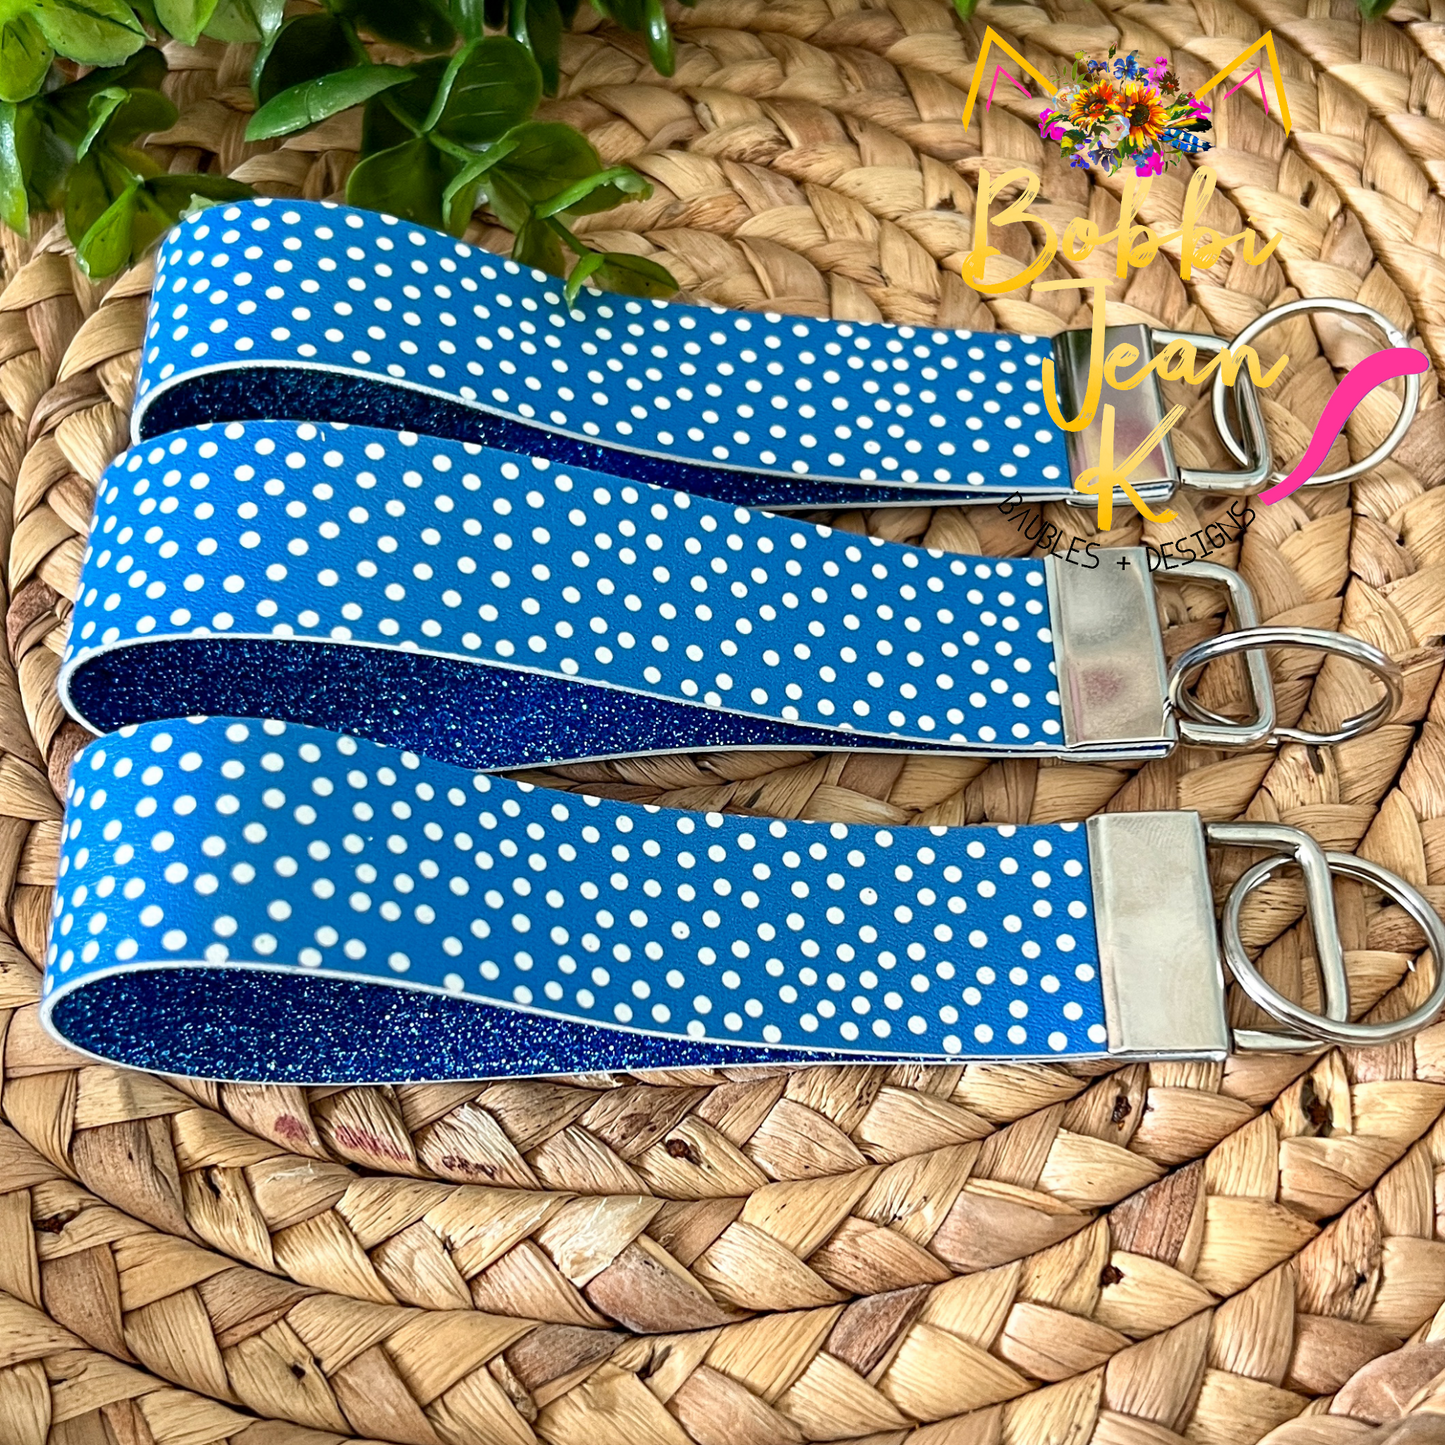 Blue & White Polka Dot Key Fob with Silver Clasp